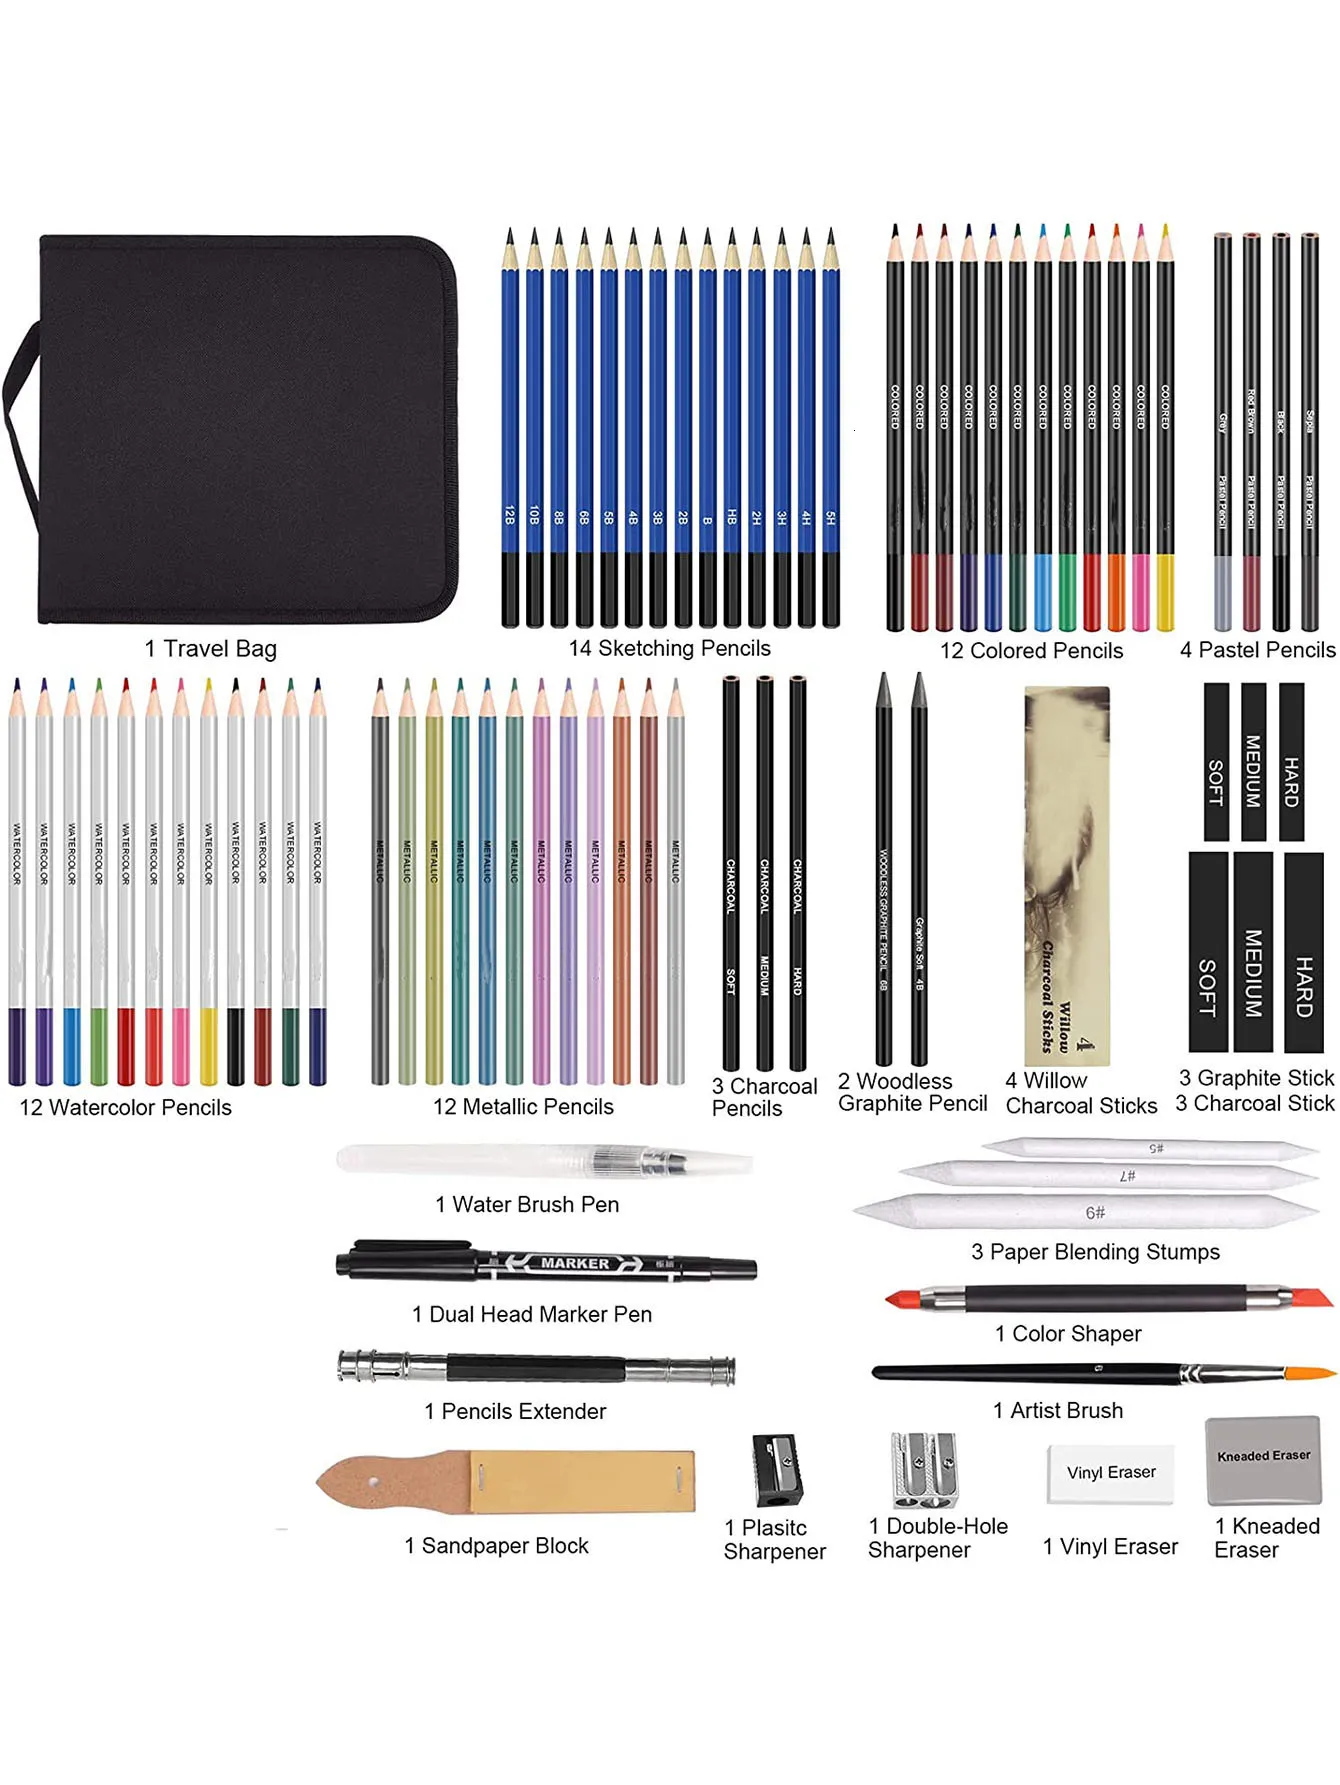 Bview Art Diverse Art Pencils Sketching Set For Beginners, Professional  Artists, Teens, And Adults Includes Painting Drawing Pencil And Art Supples  230826 From Youngstore10, $15.95